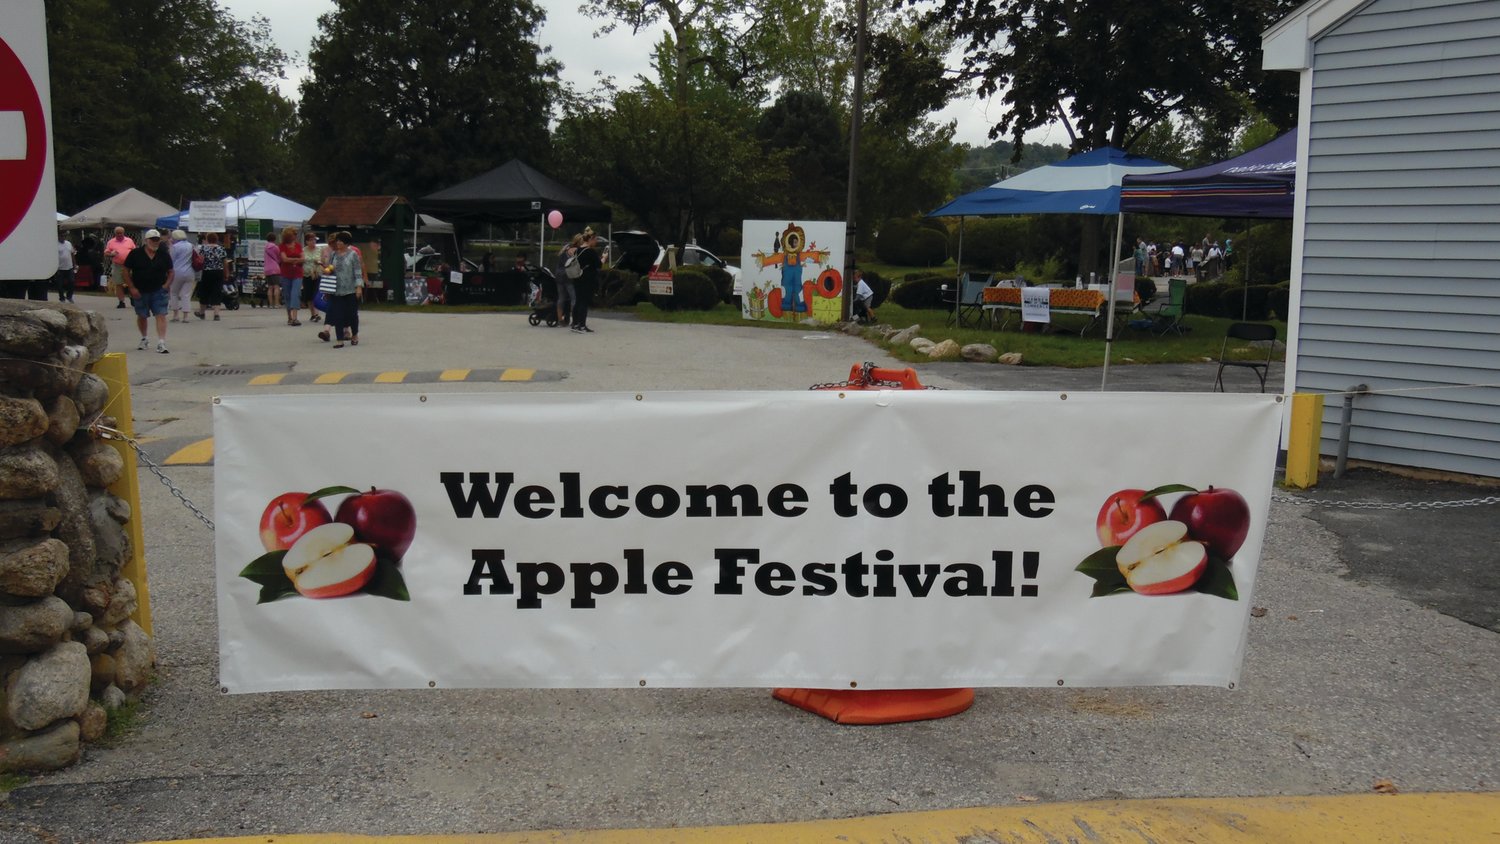 FESTIVALS OF YESTERYEAR: The annual harvest season has arrived. And with the end of summer, the 33rd annual Apple Festival has also returned.